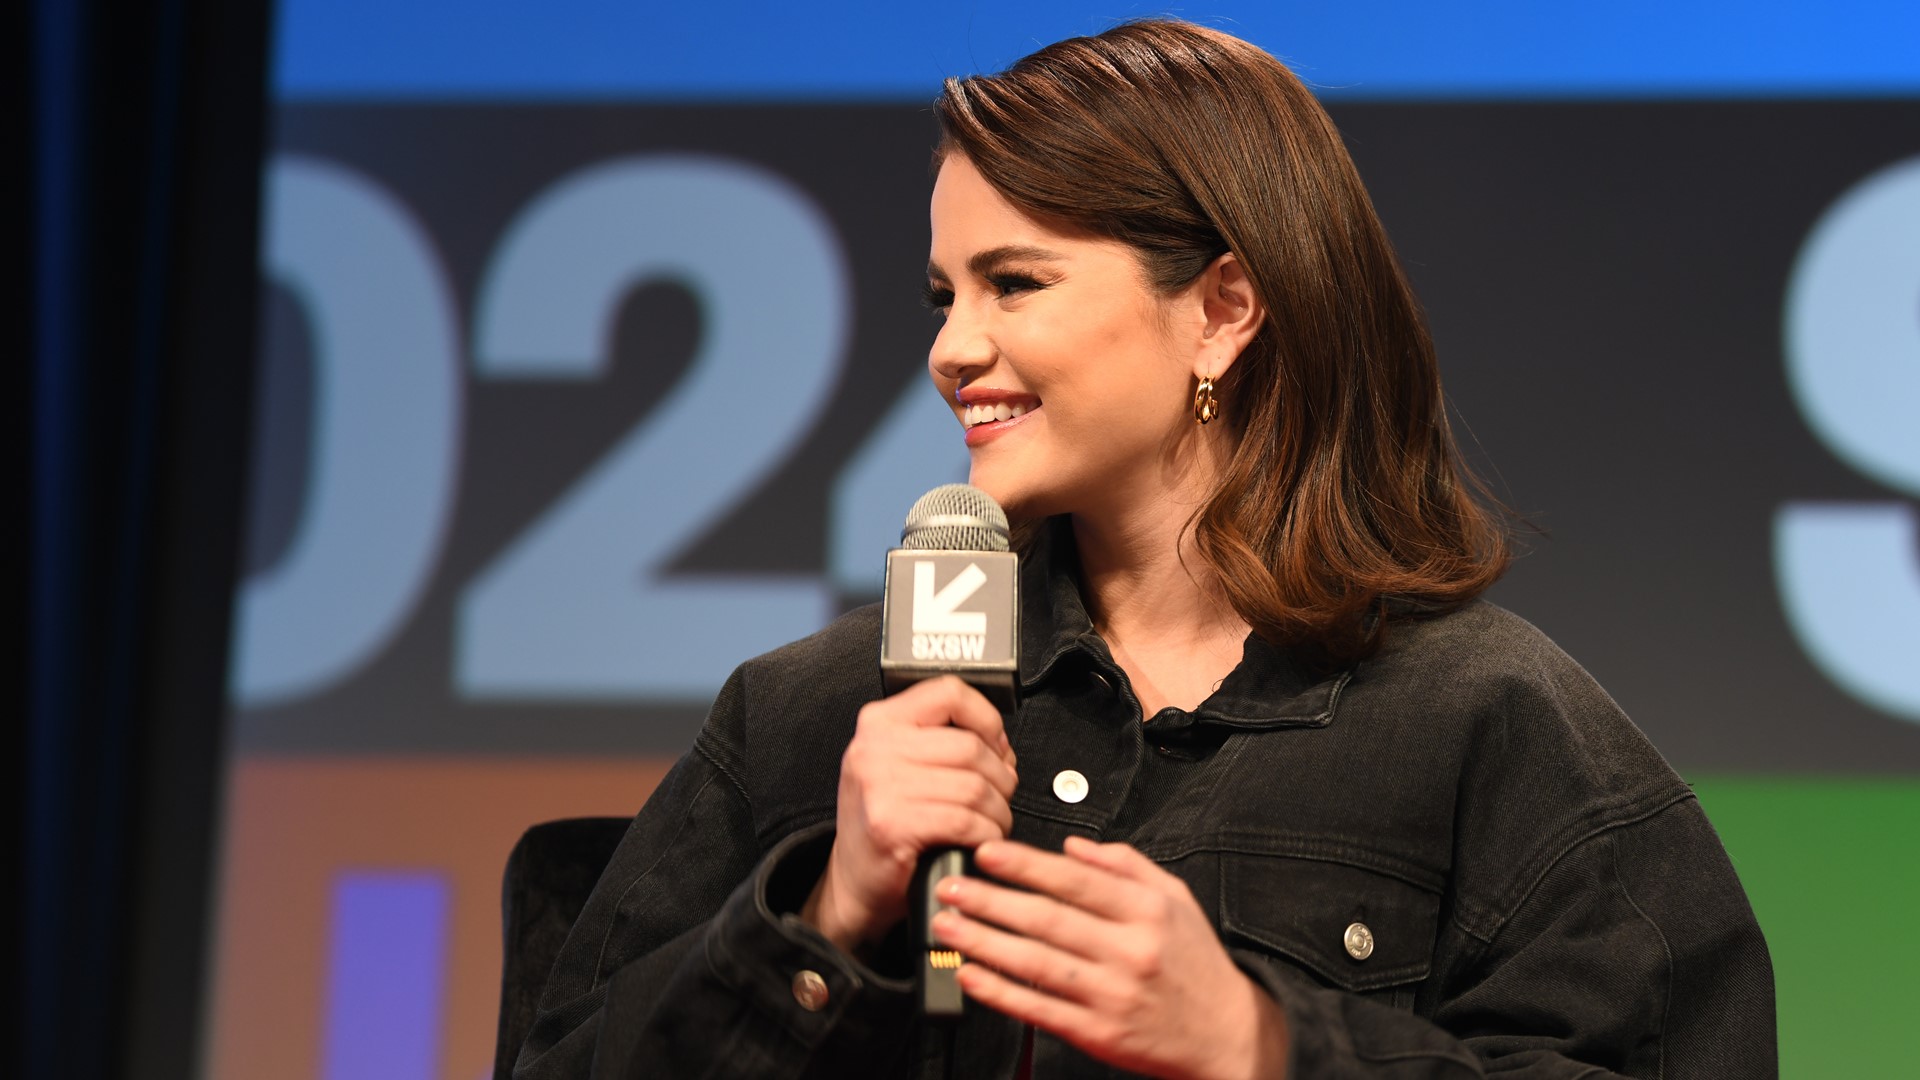 Selena Gomez opens up about mental health struggles in SXSW panel | kvue.com